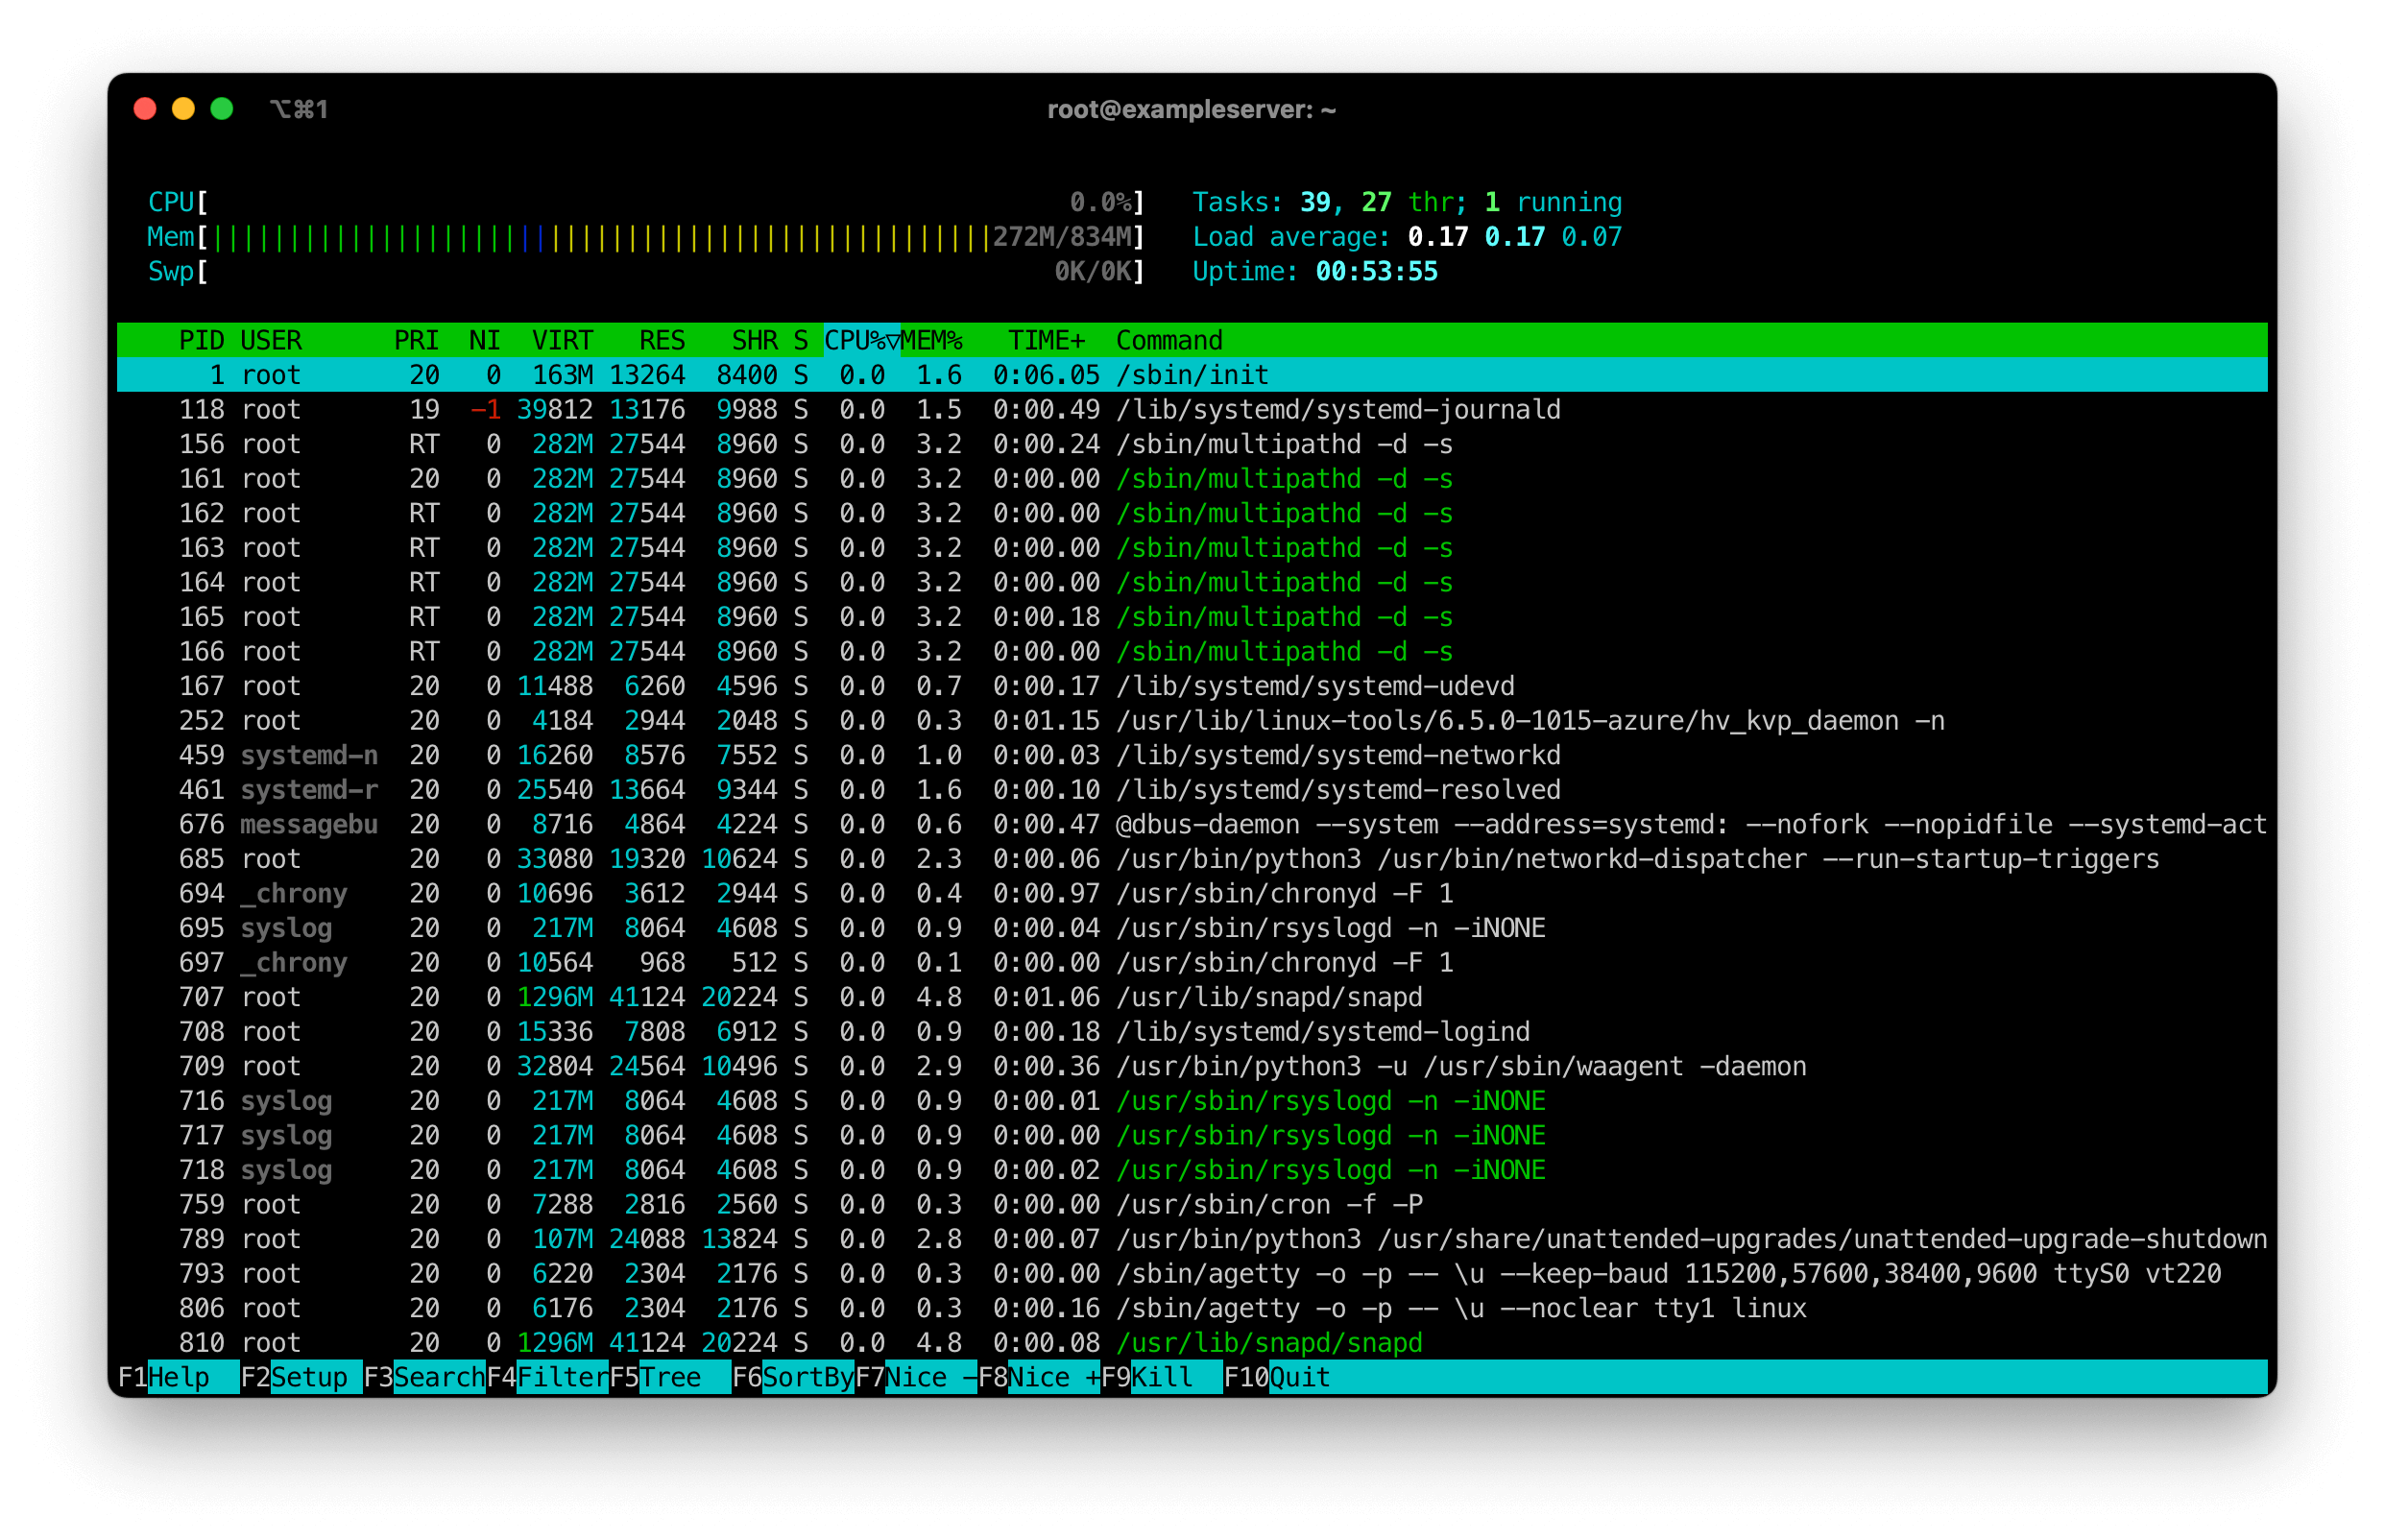 Screenshot of a Linux terminal showing the output of the htop command